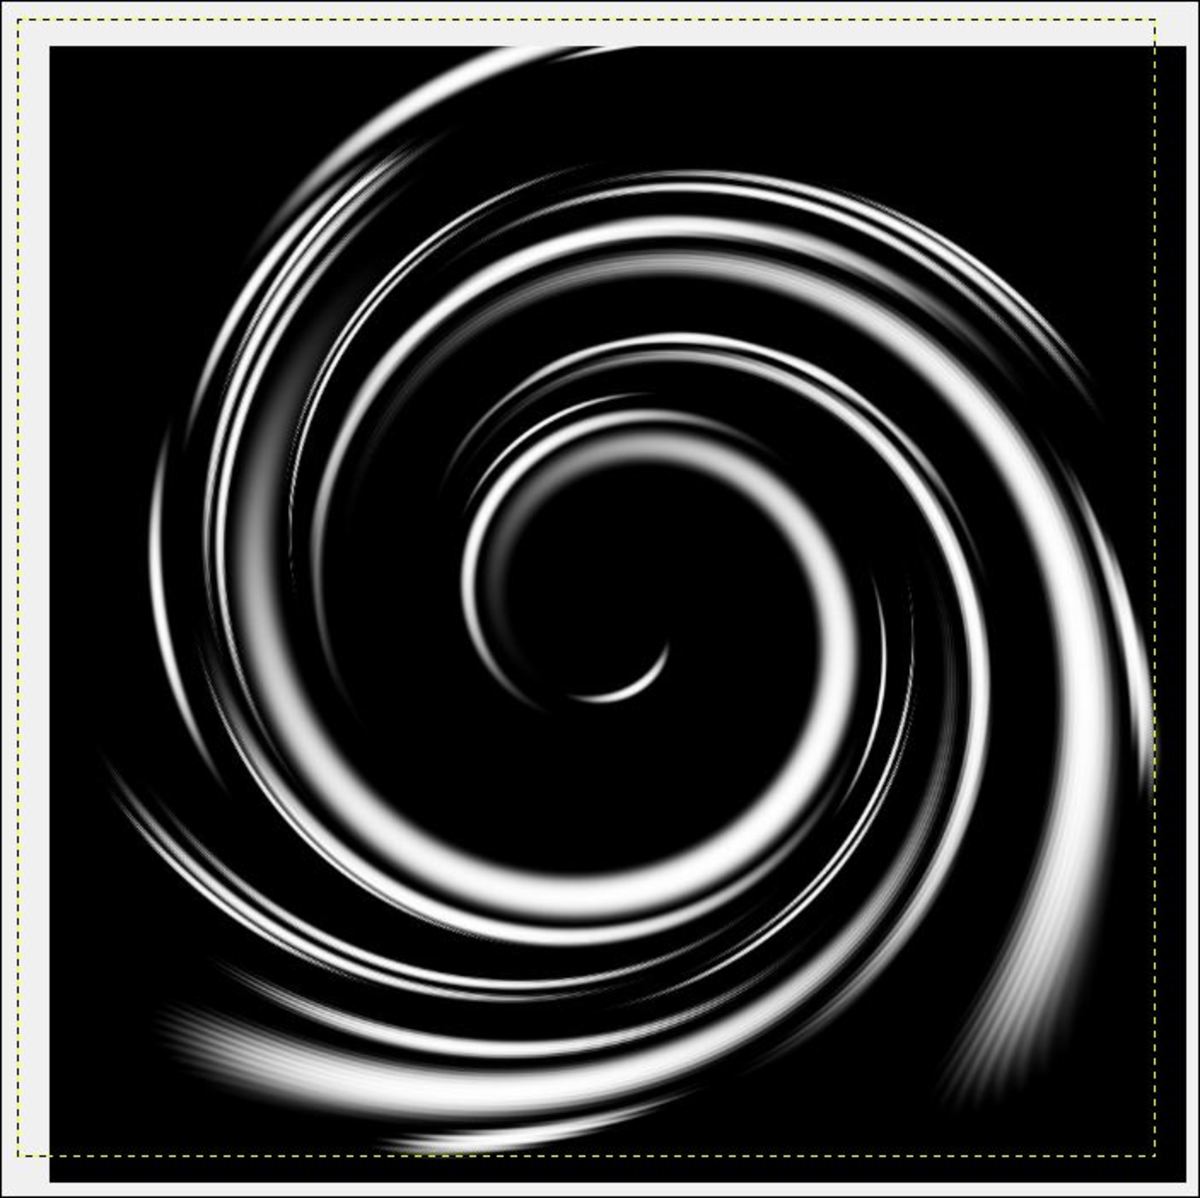 How to create an abstract background with swirls in GIMP tutorial ...